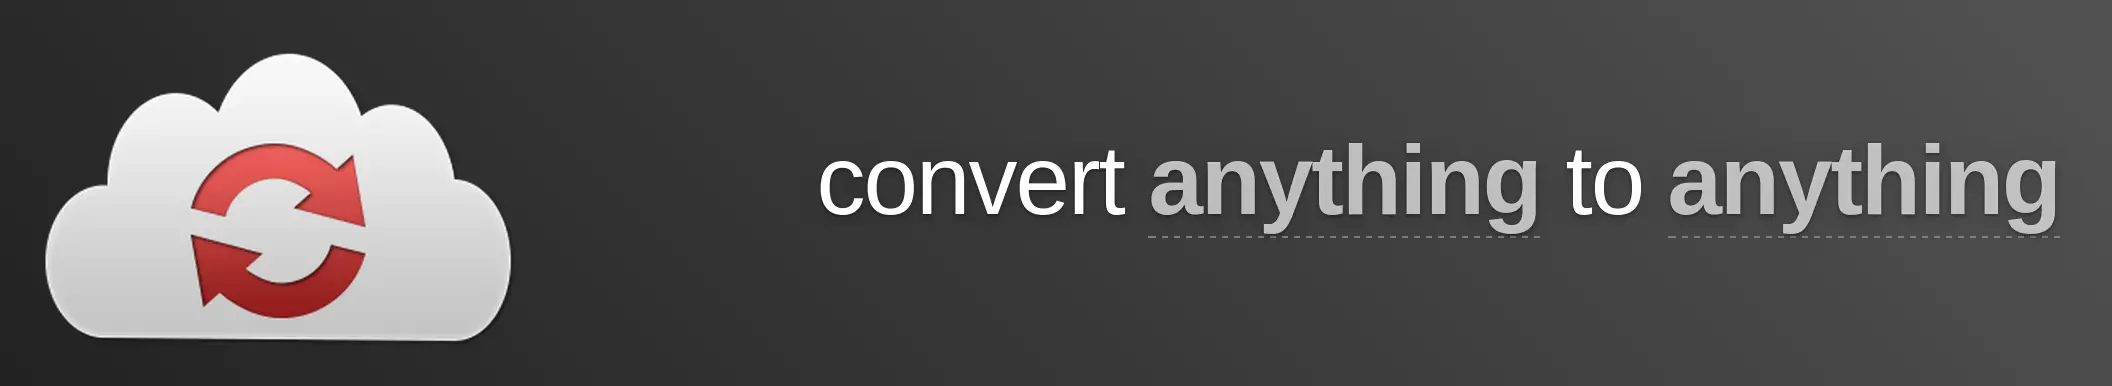 CloudConvert - for some reason we don't have an alt tag here